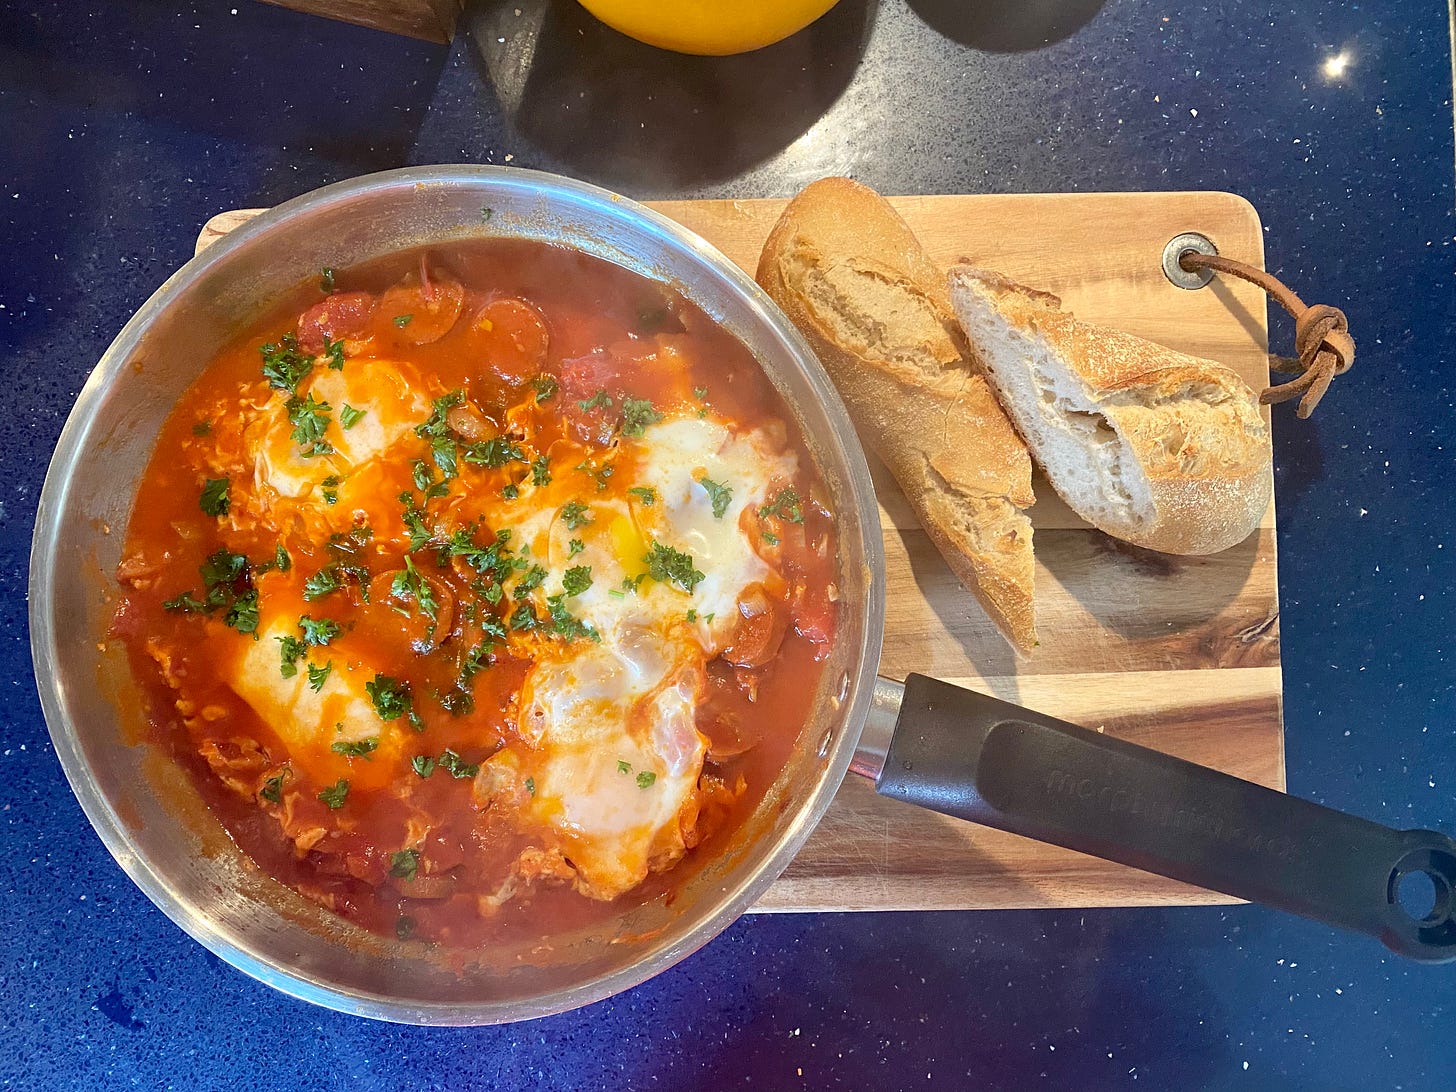 blue worktop, with a wooden board. On the board is a frying pan with a tomato-based mixture, eggs, and chopped green herbs. Some crusty bread is to the side. 